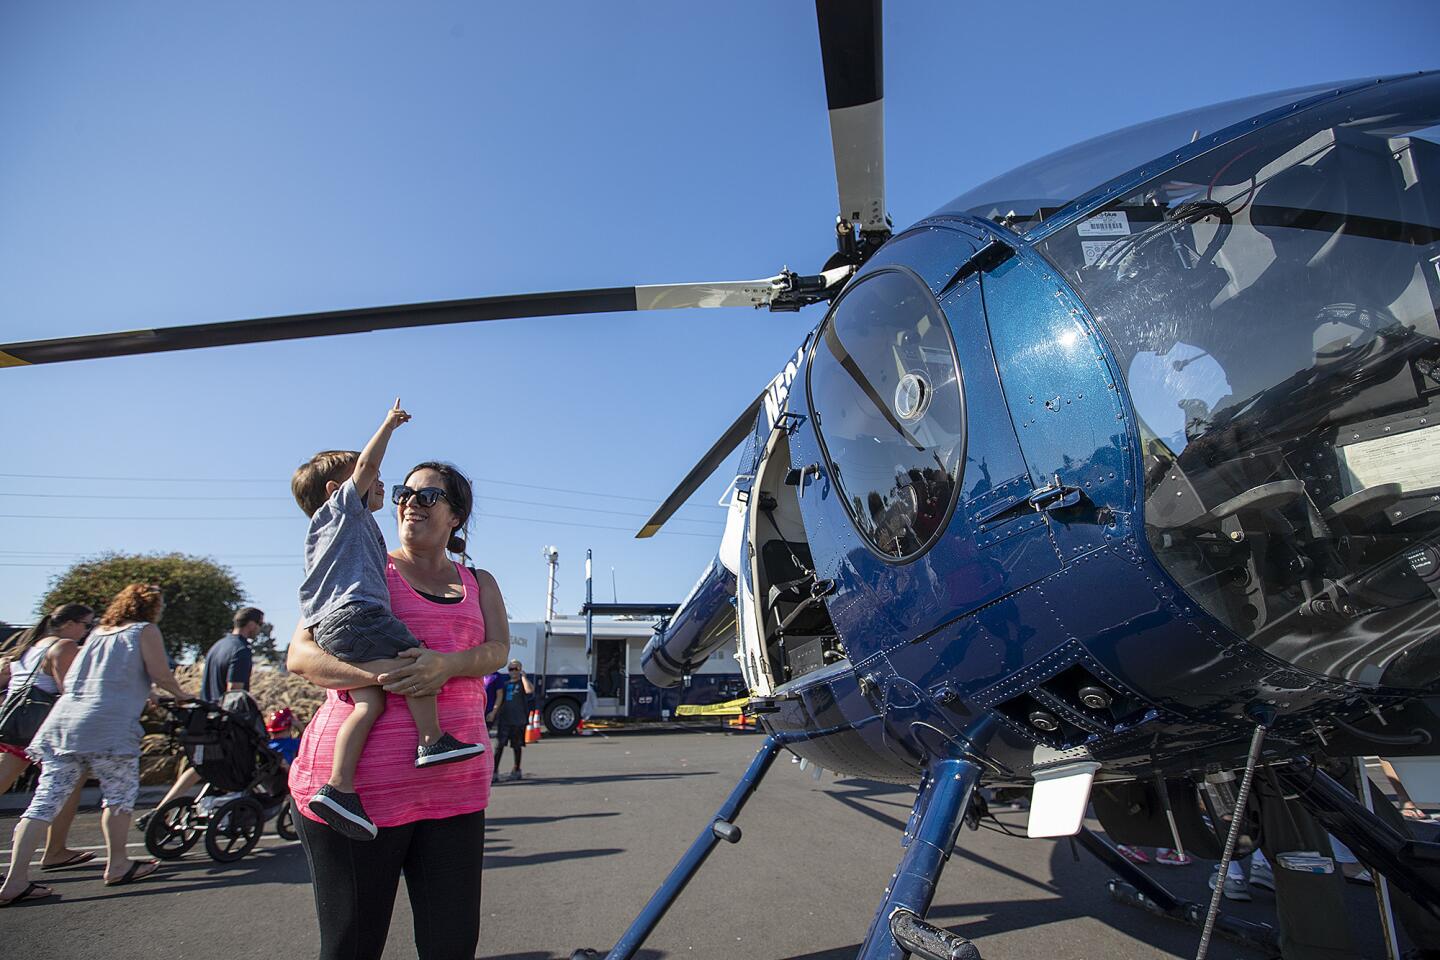 Photo Gallery: The Huntington Beach police and fire departments hold a National Night Out event